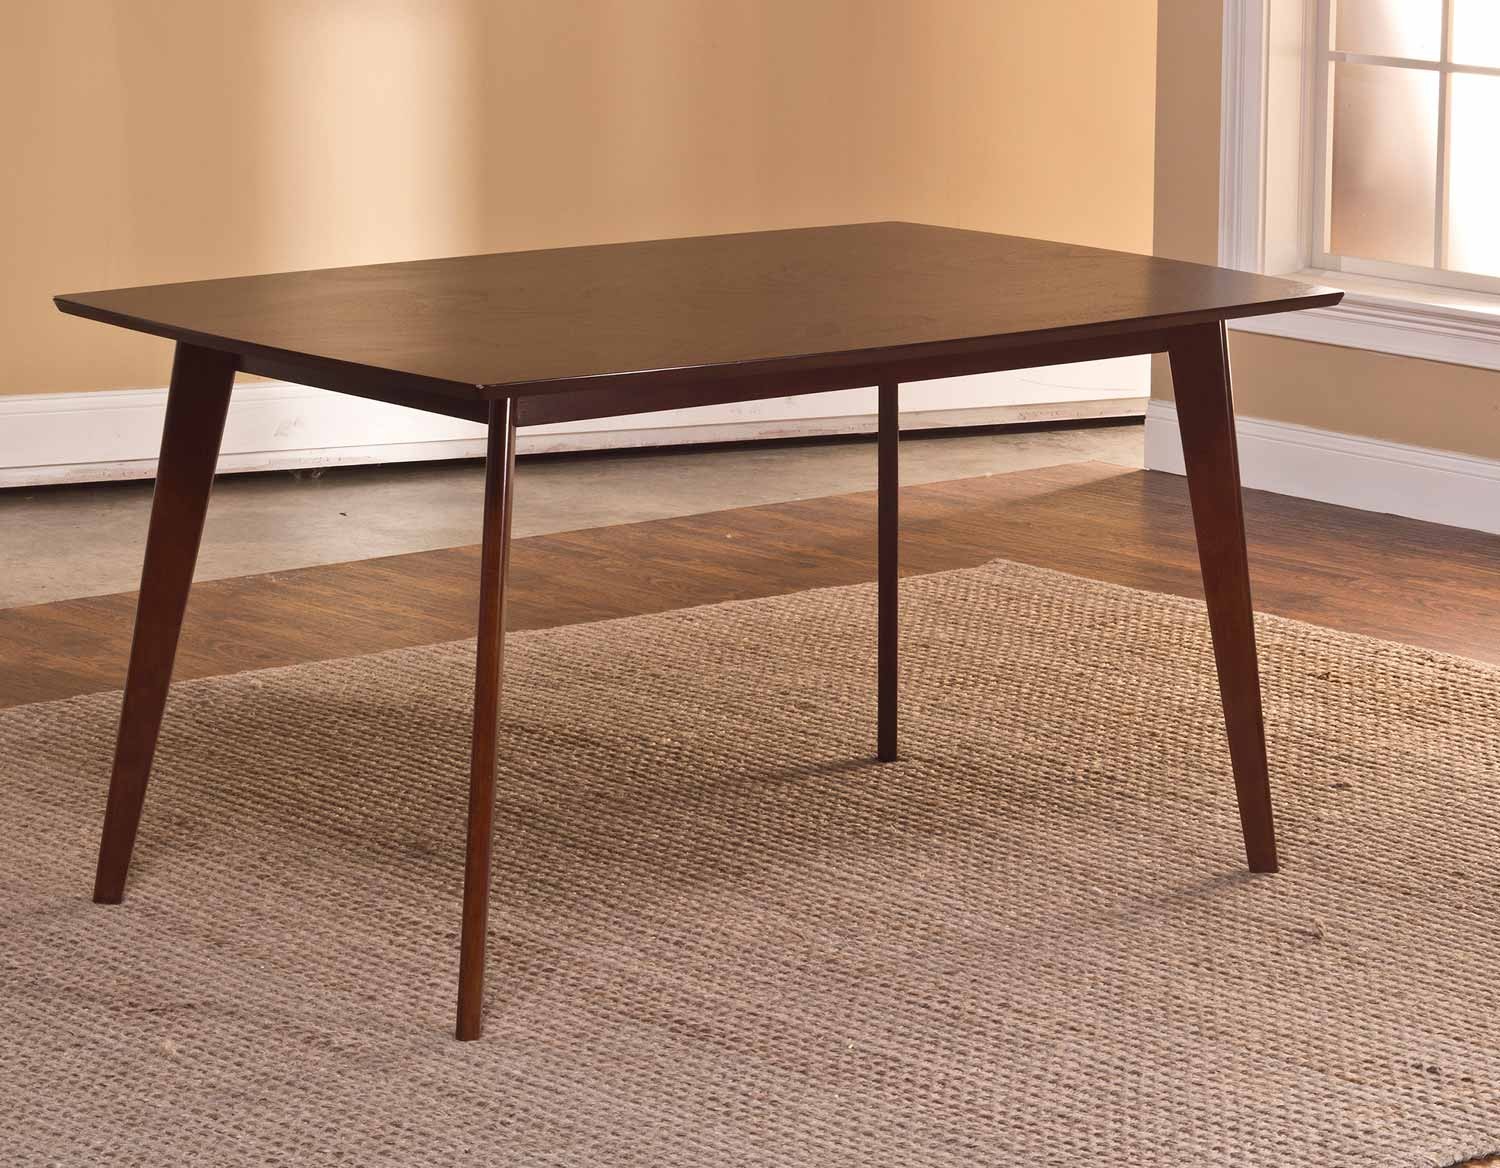 Hillsdale Allentown Wood Dining Table - Cappuccino